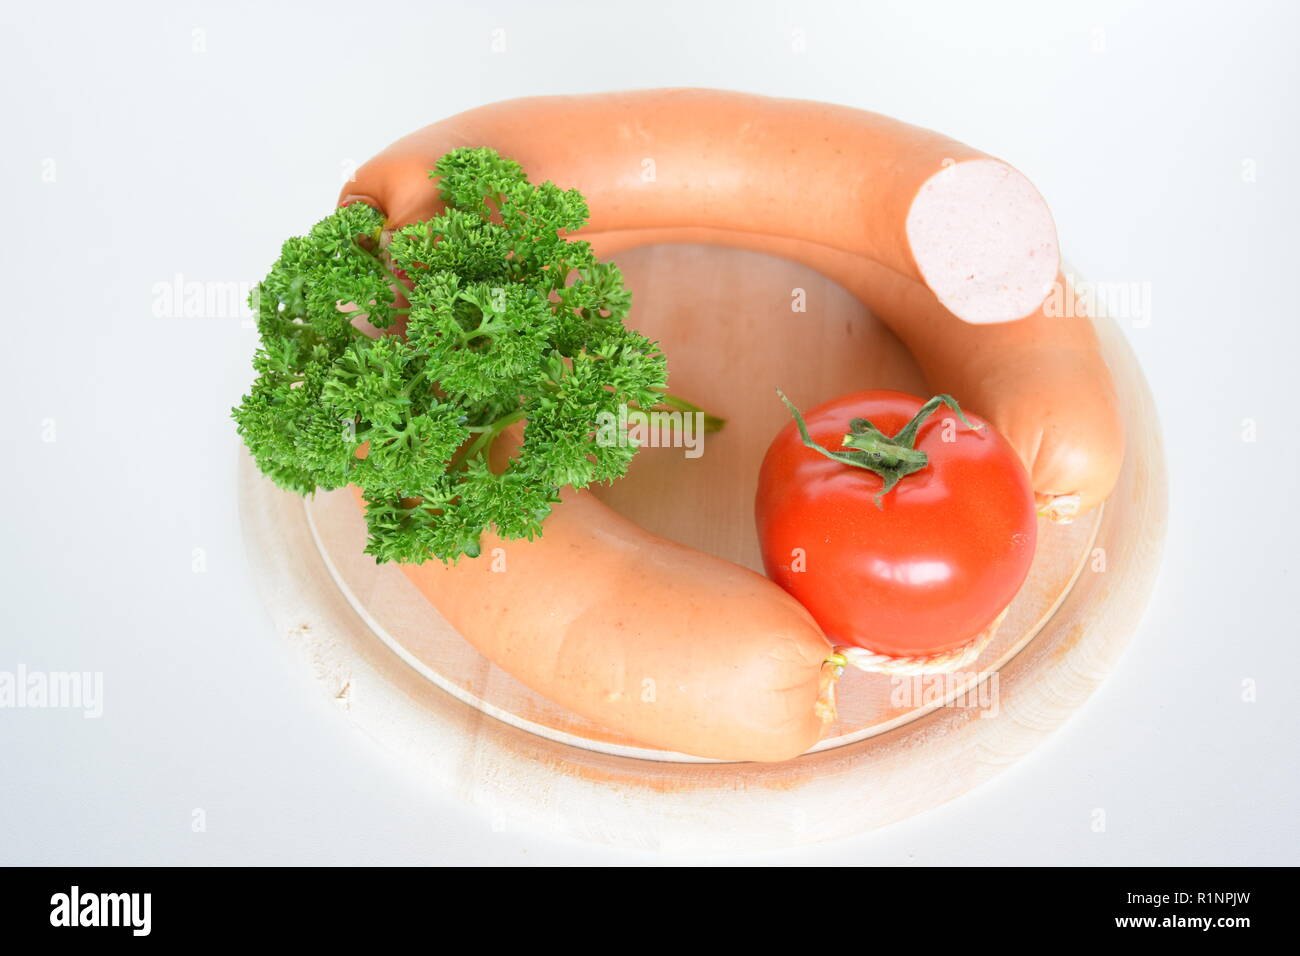 stock Fleischwurst images hi-res photography and - Alamy